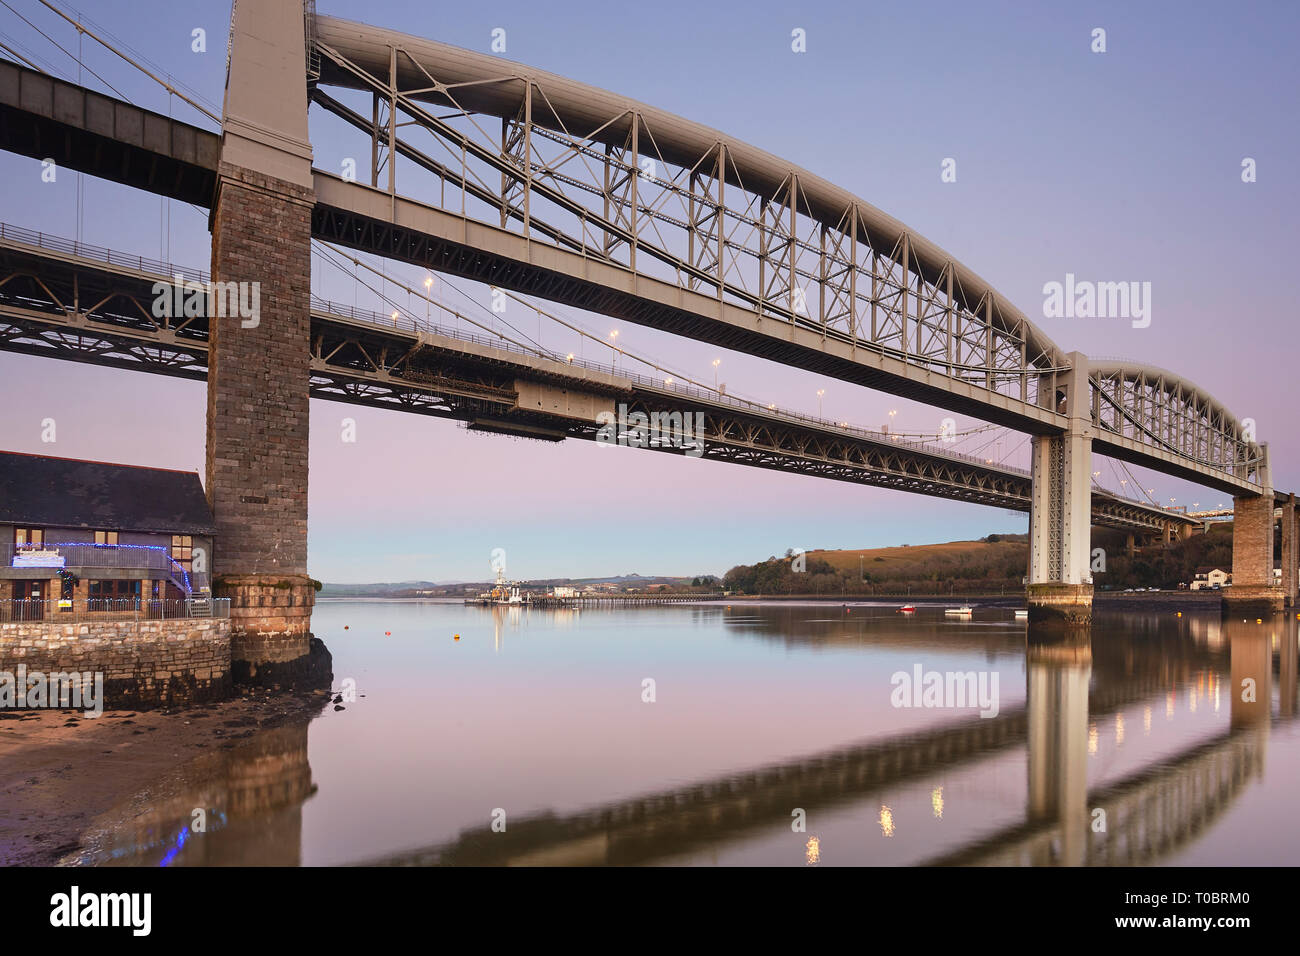 A dusk view of the Tamar Bridges, across the Hamoaze, estuary of the River Tamar, linking Plymouth in Devon and Saltash in Cornwall, Great Britain. Stock Photo